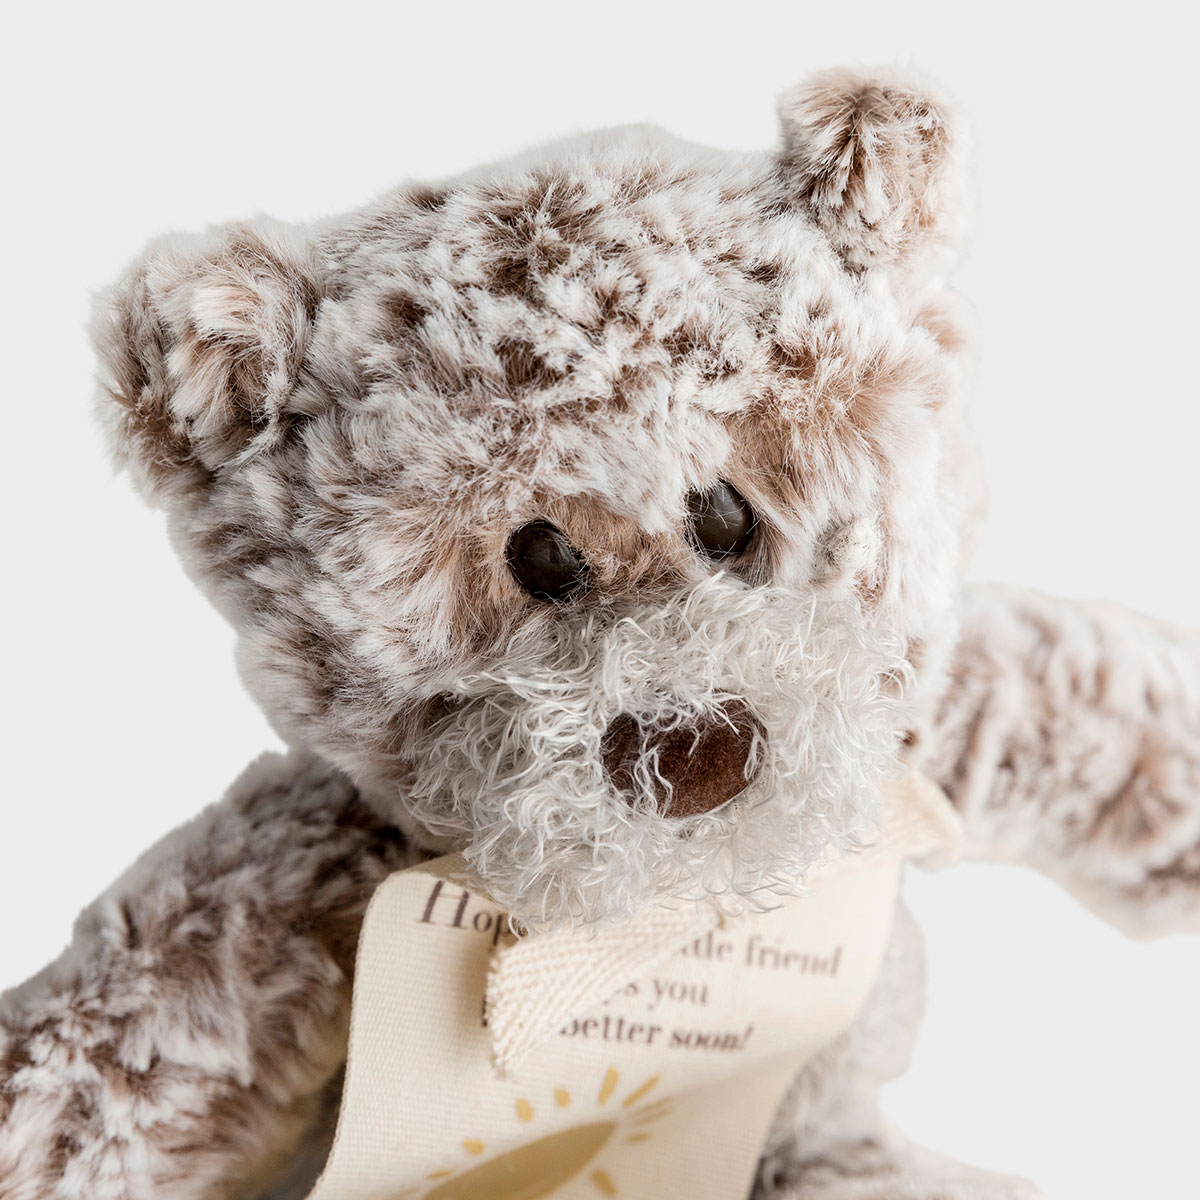 This mini plush giving bear is a perfect gift to wish a friend or family member to feel better soon. The soft fabric of this taupe, stuffed teddy bear is soothing to the touch.